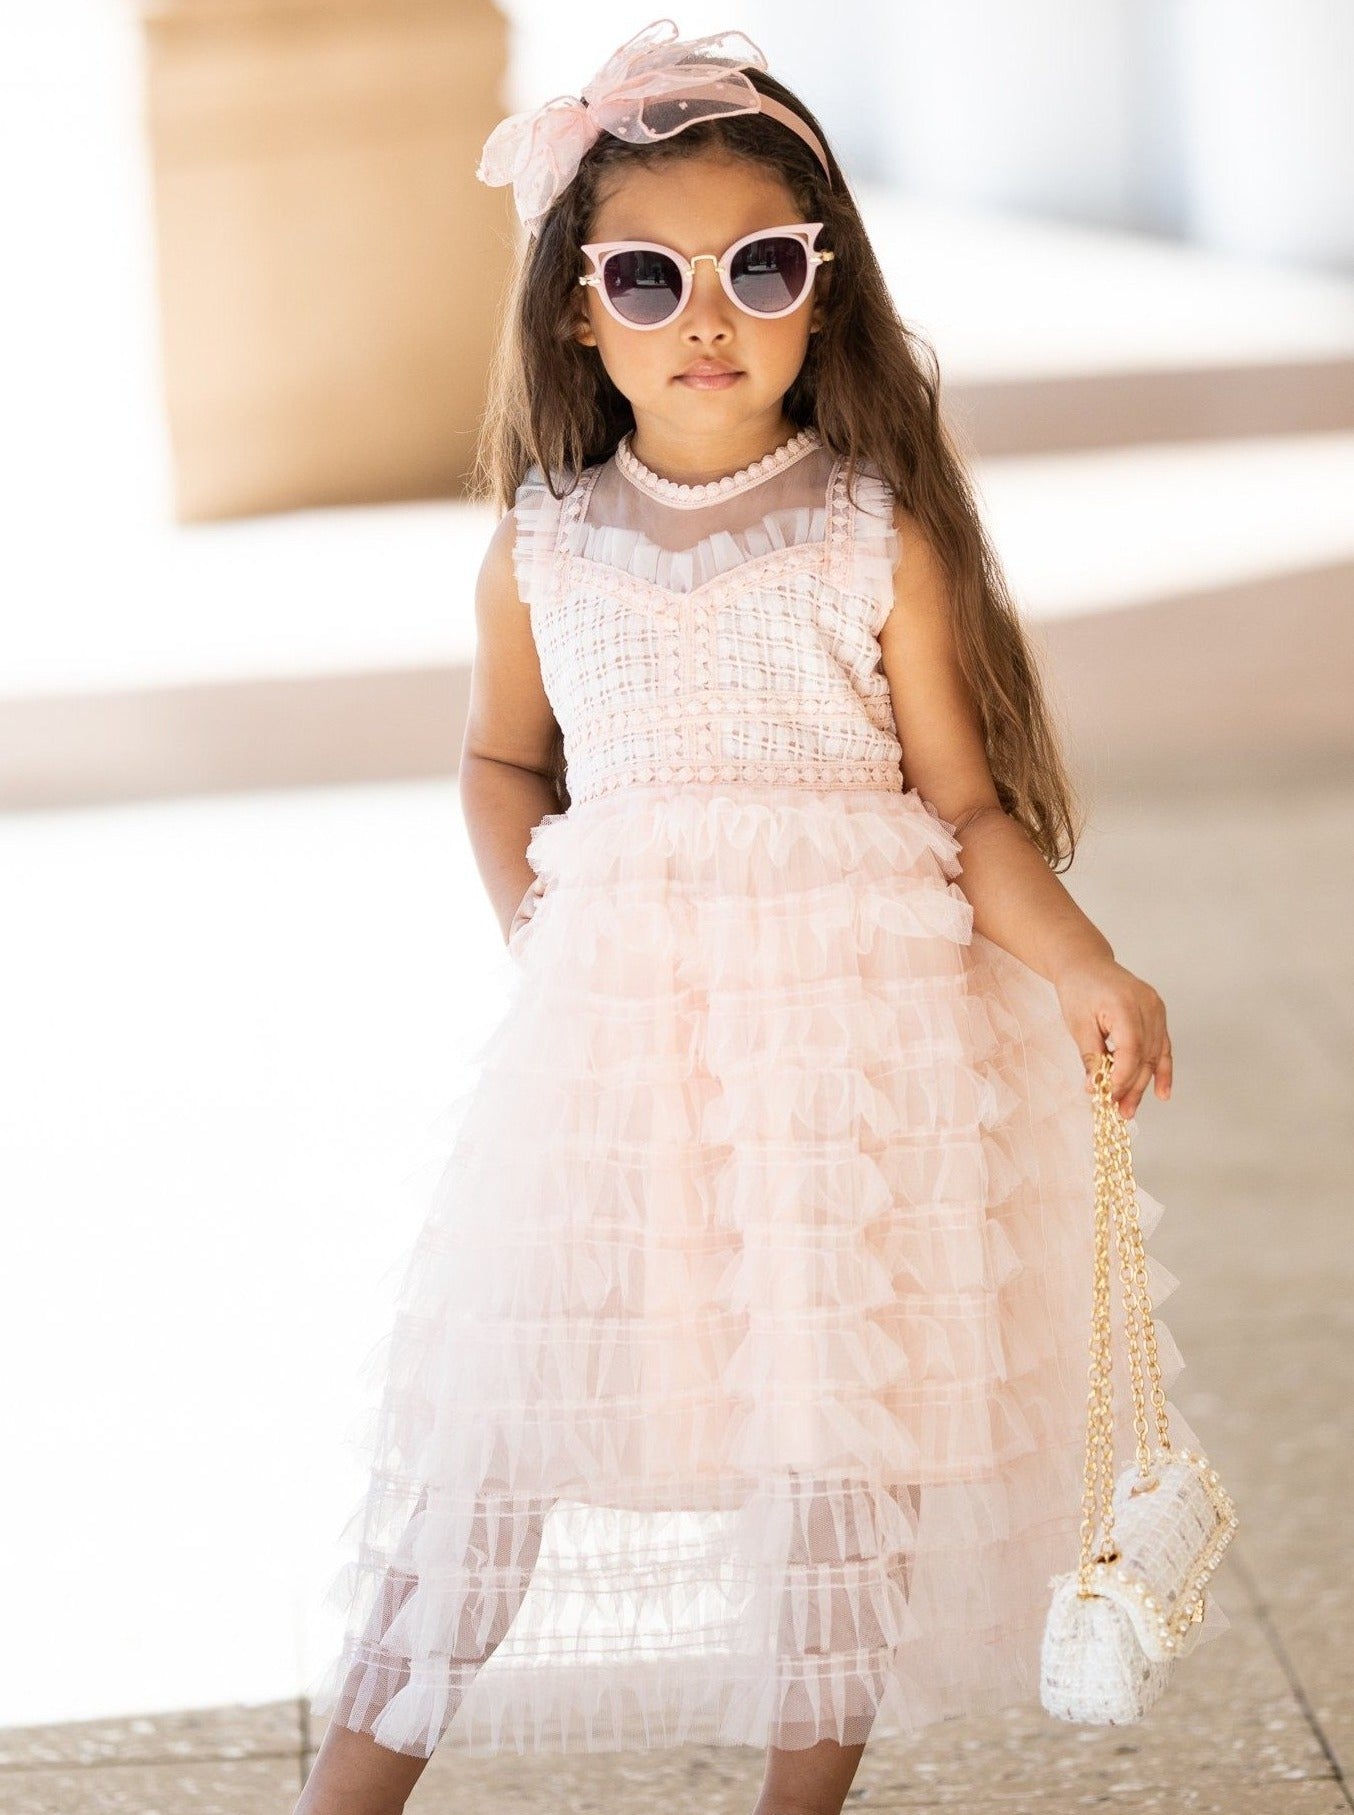 girls spring multi layer ruffle special occasion dress 4t-8Y